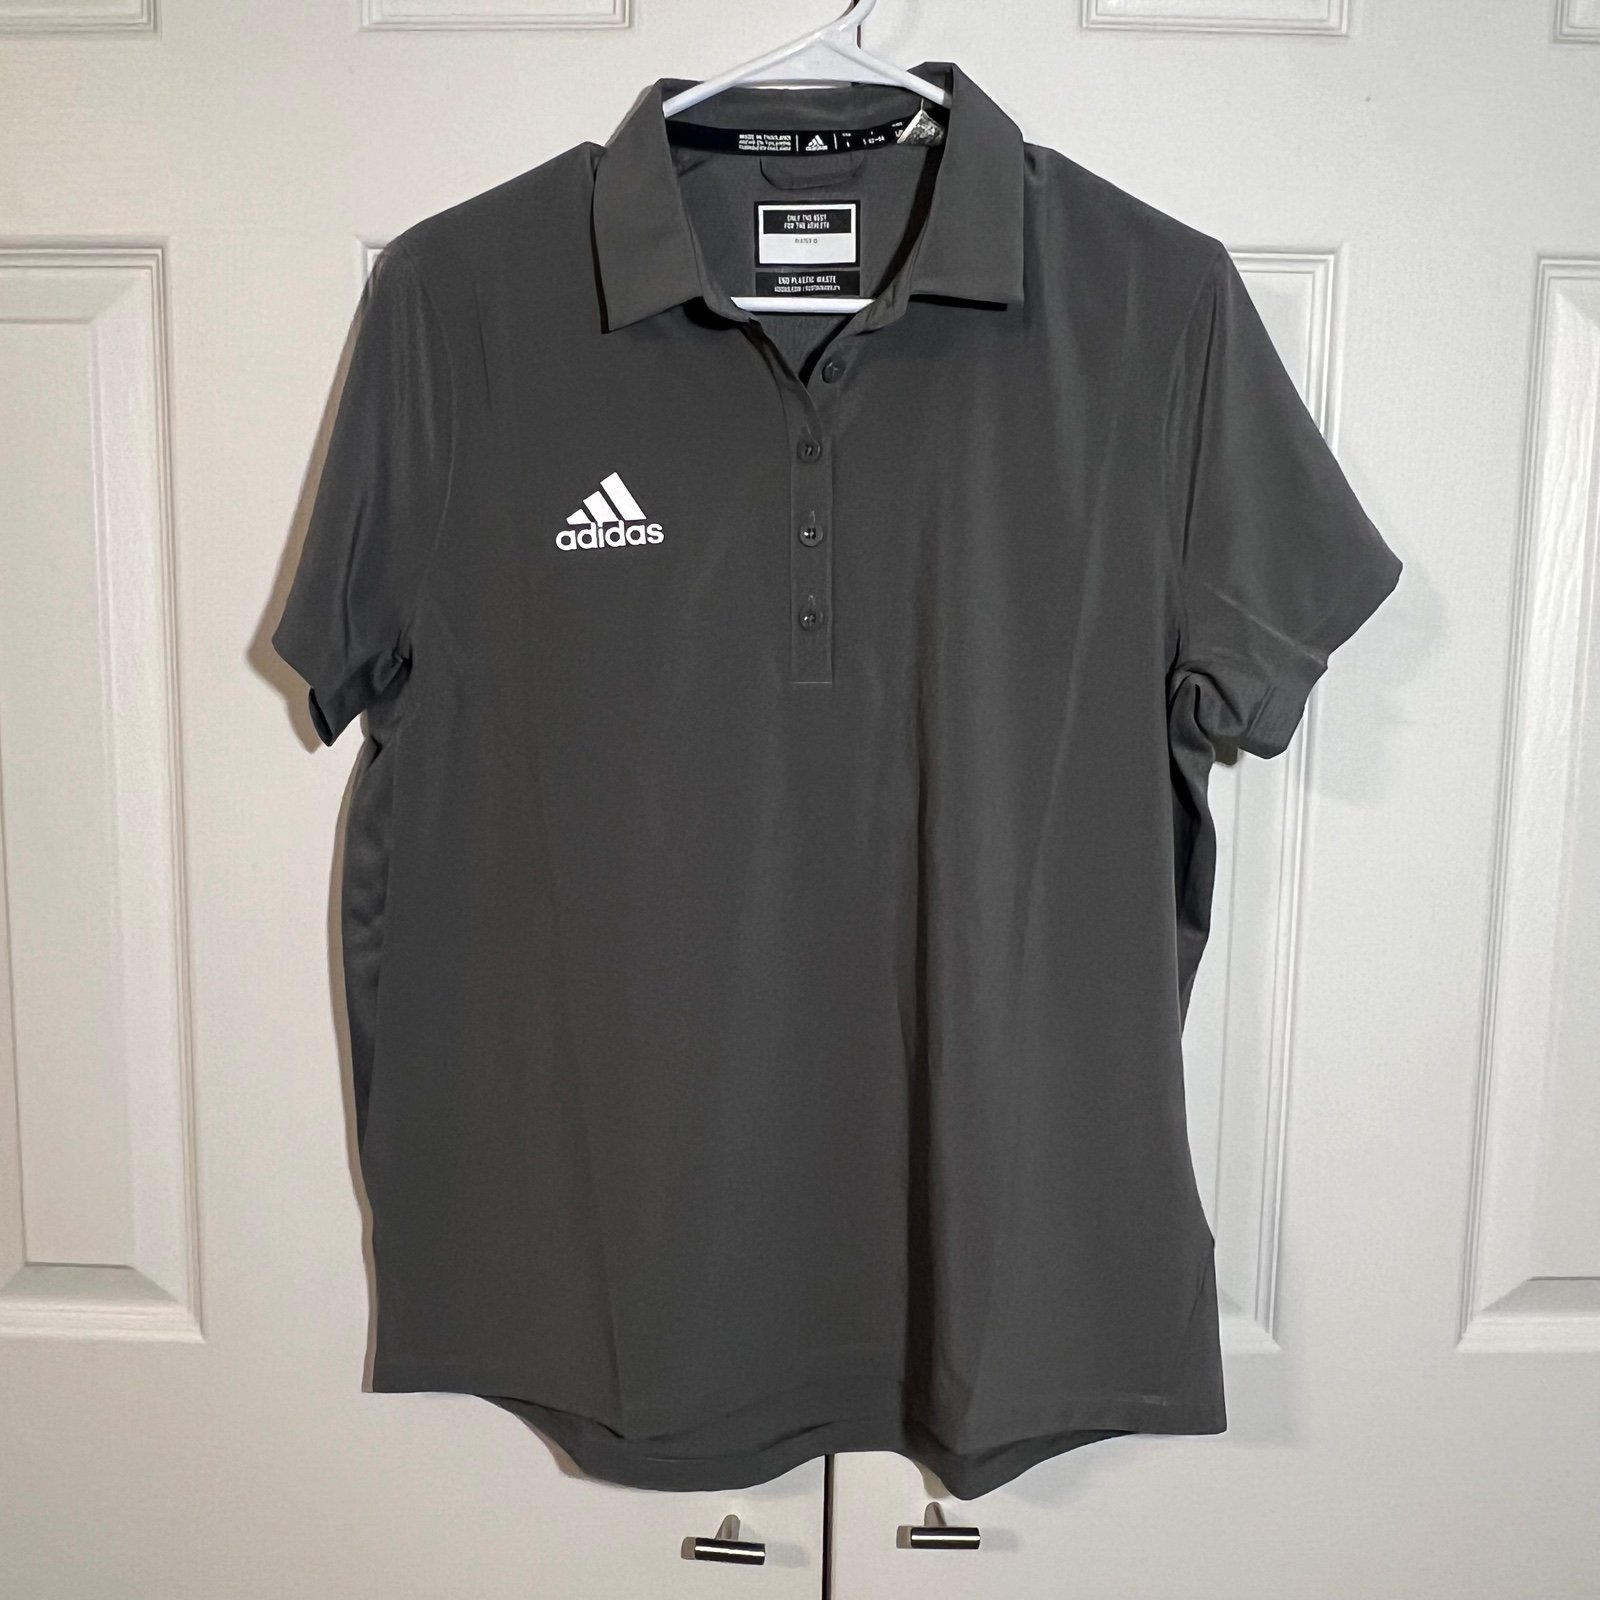 cheapest place to buy  Adidas golf polo ozjHt0Zmr US Sale